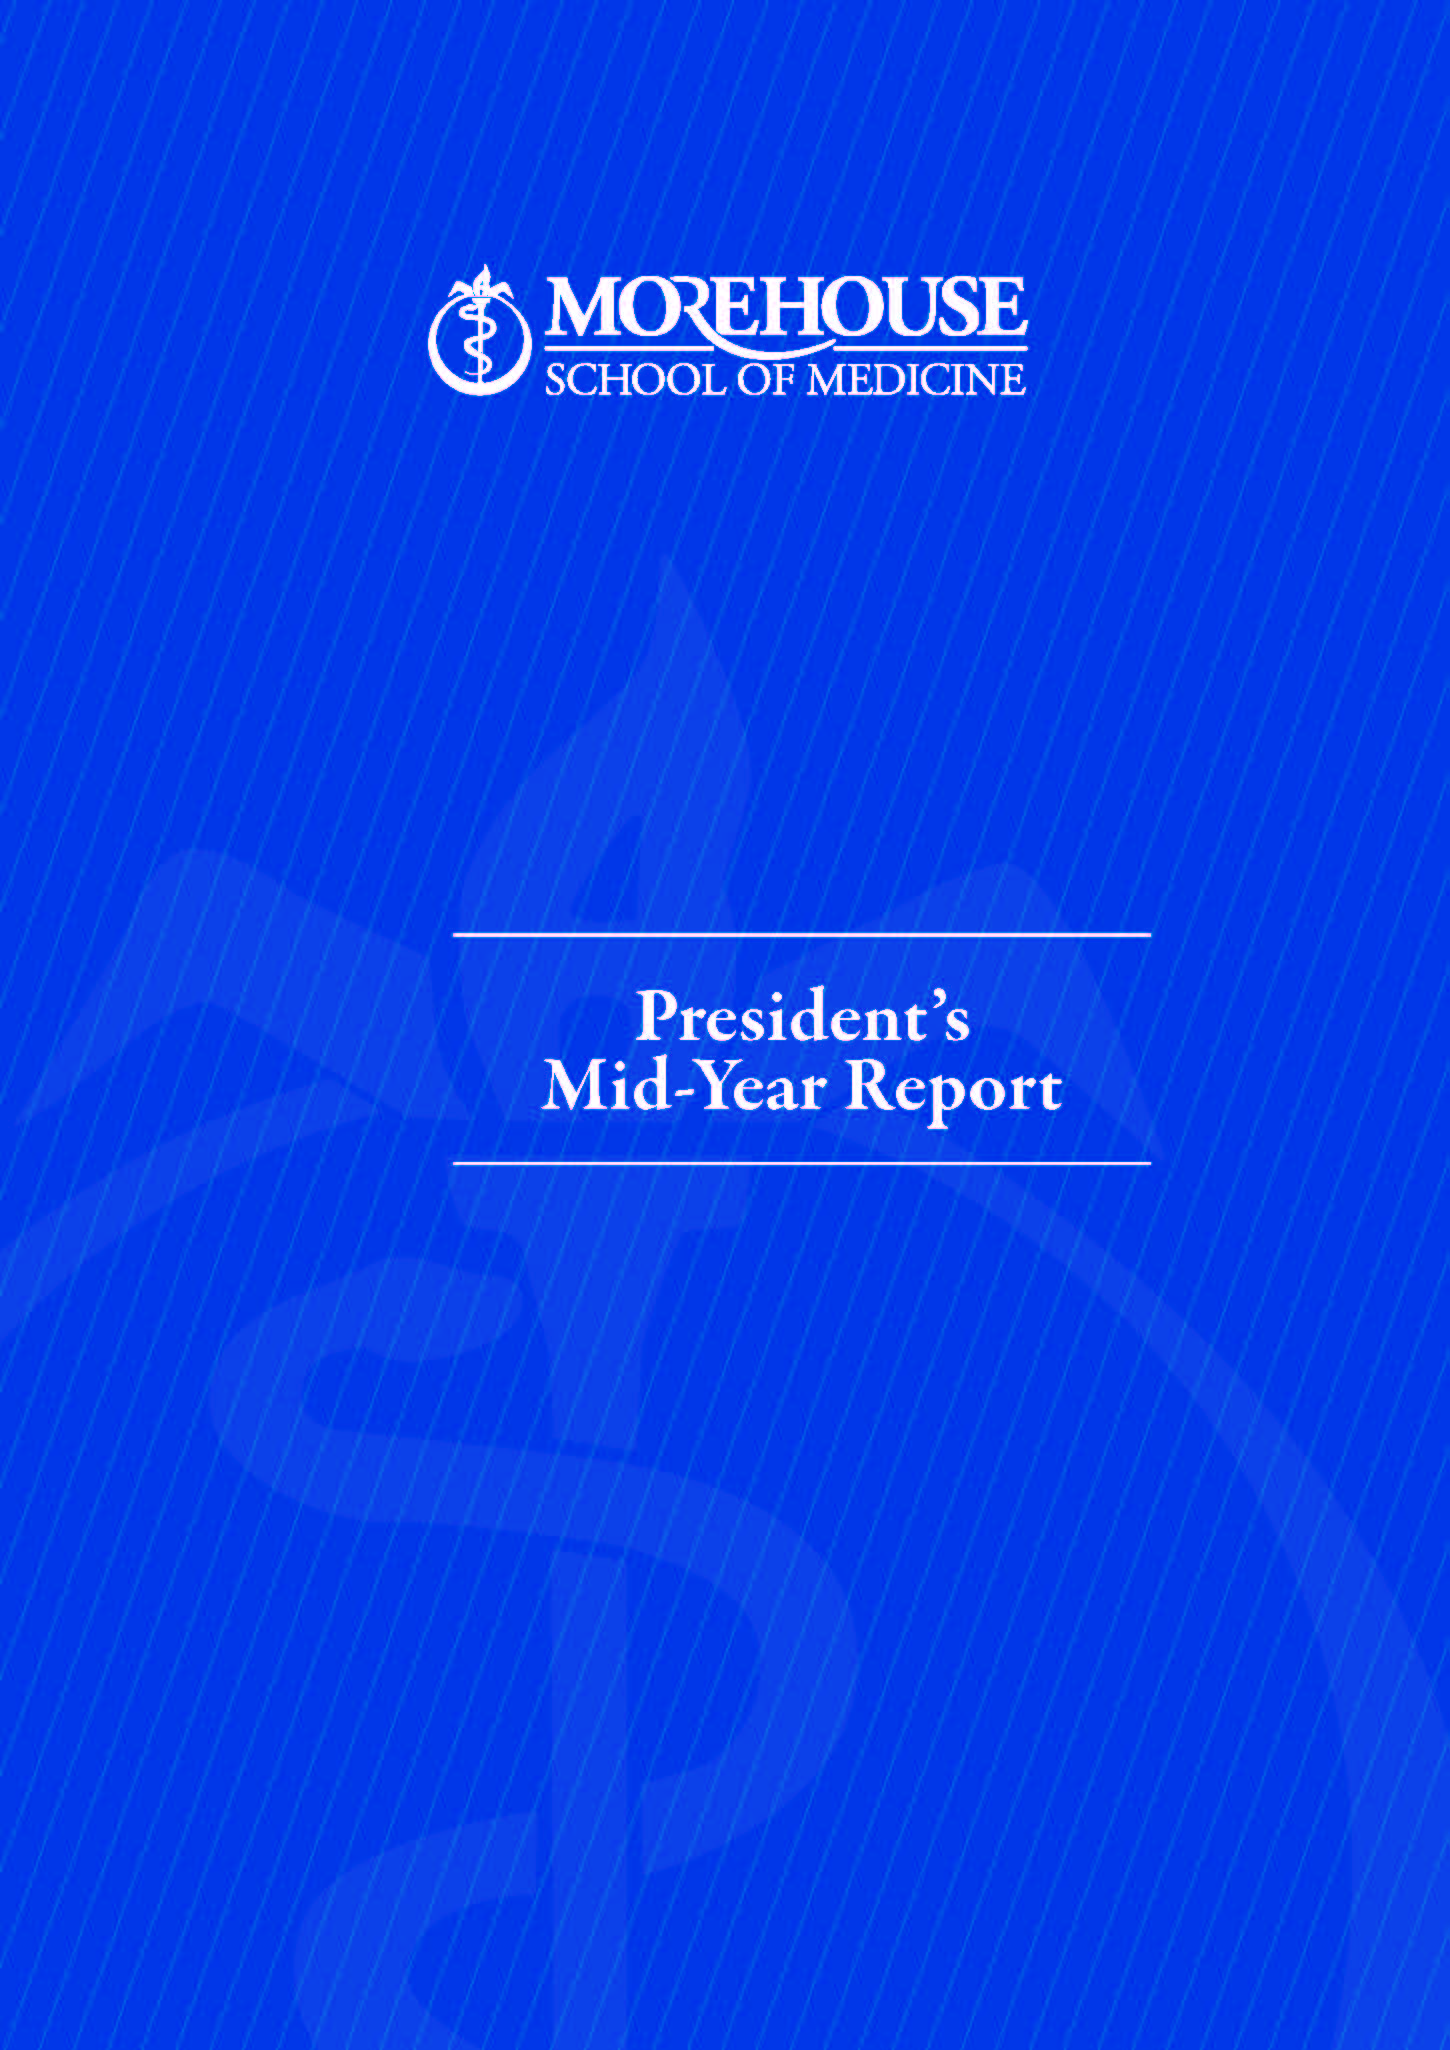 President's Mid-Year Report